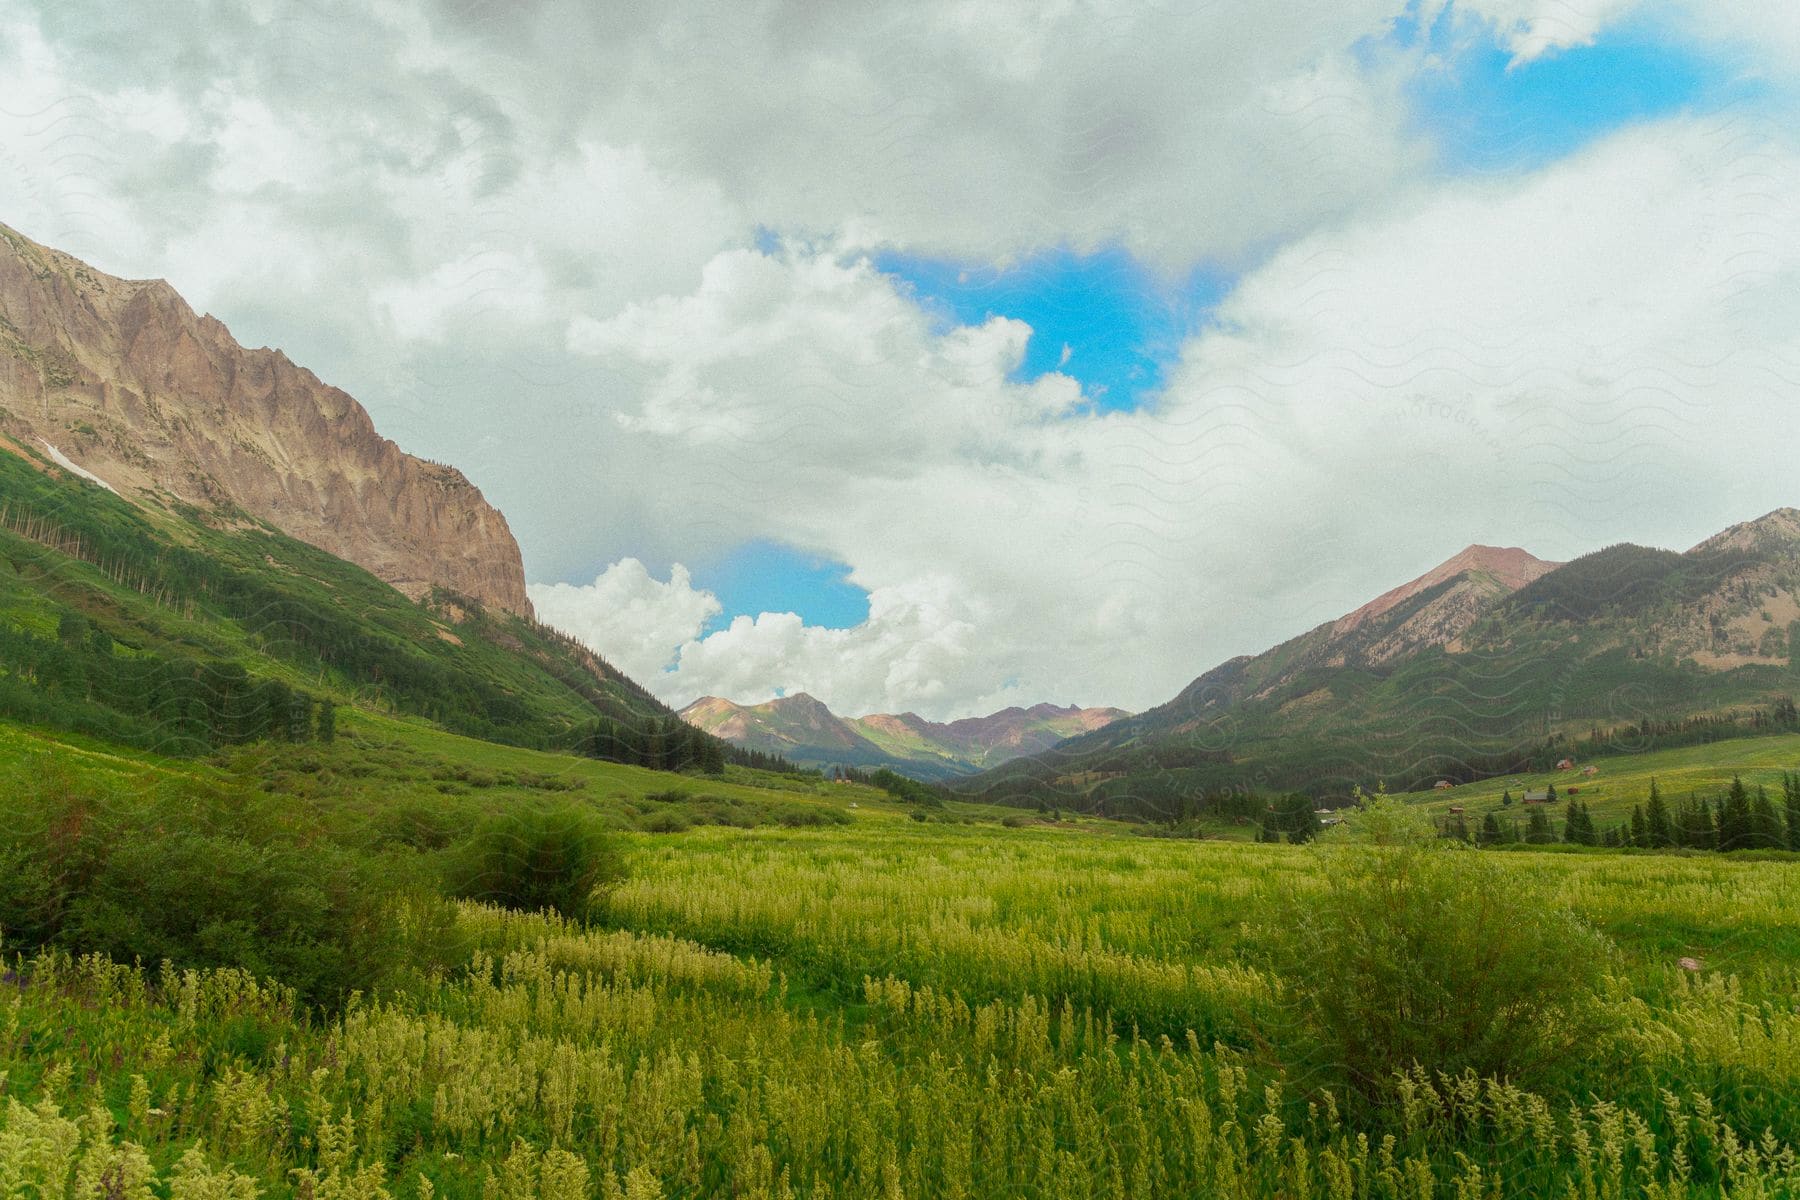 Mountains surround a grassy valley under a cloudy blue sky.